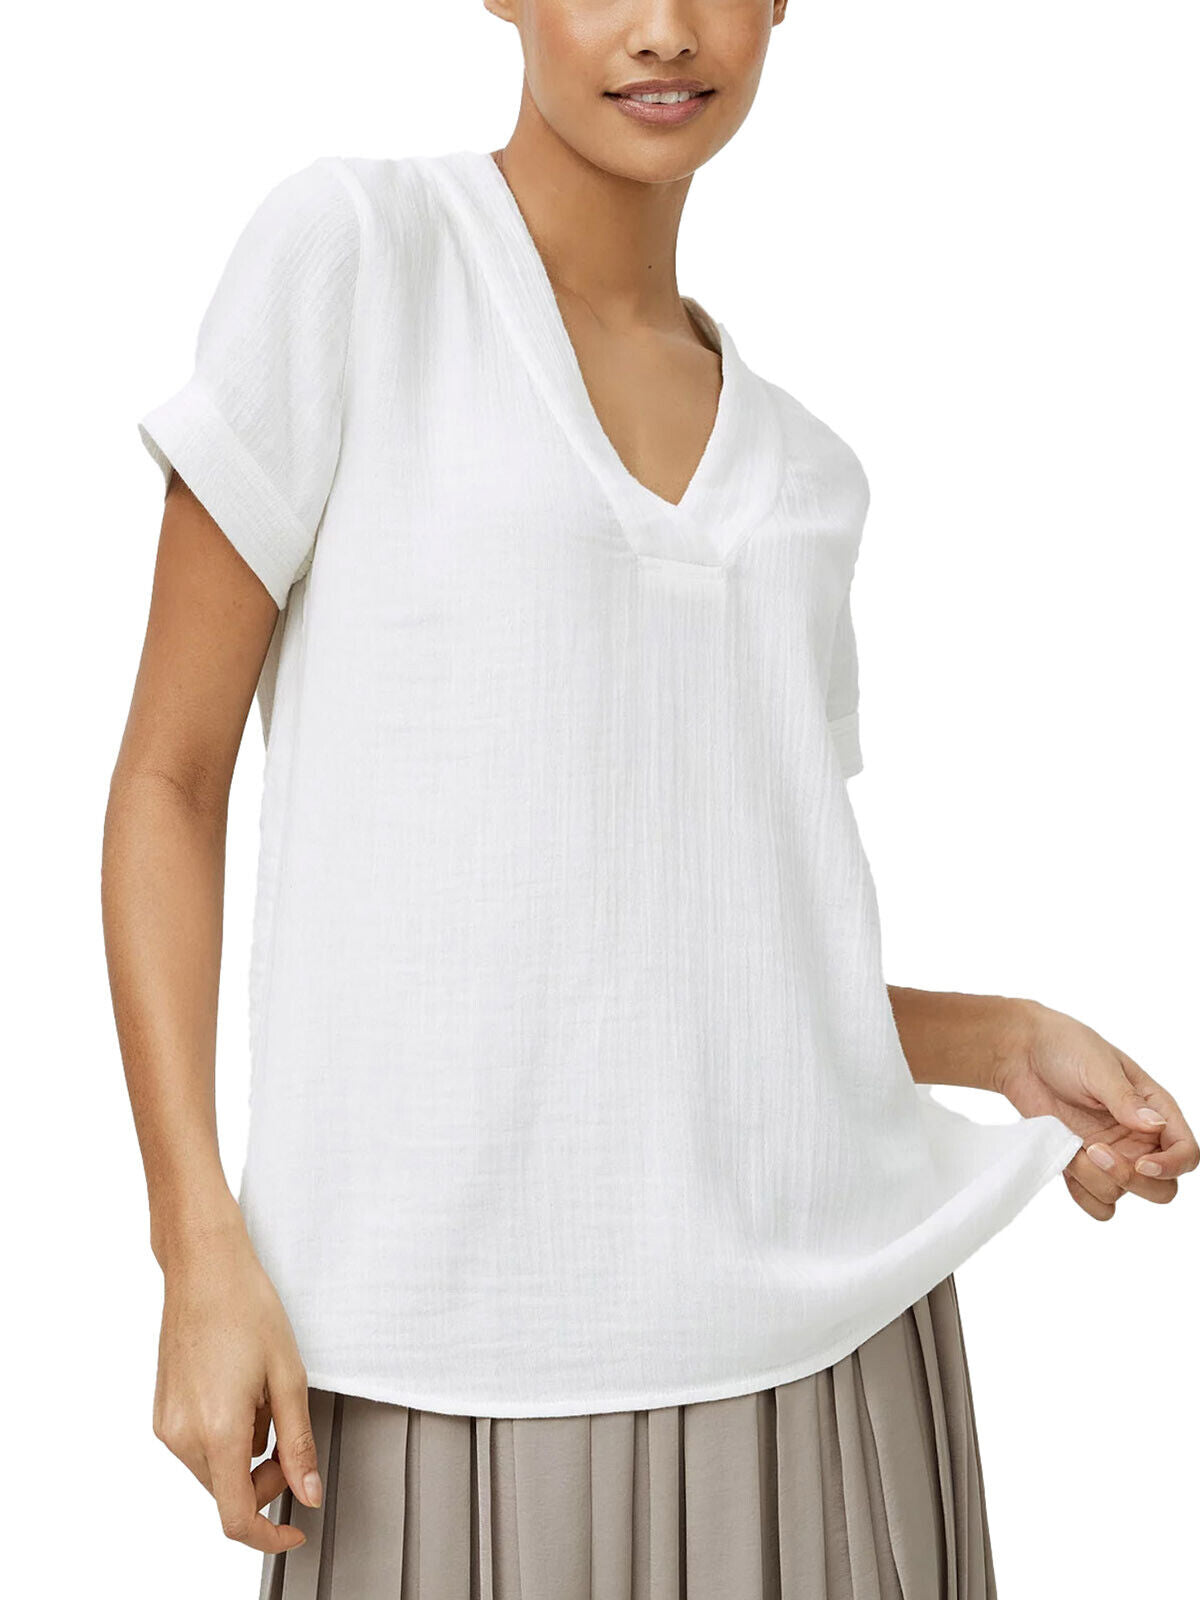 EX White Company Ivory Double Cotton Crinkle V-Neck Top in Size 8 RRP £65